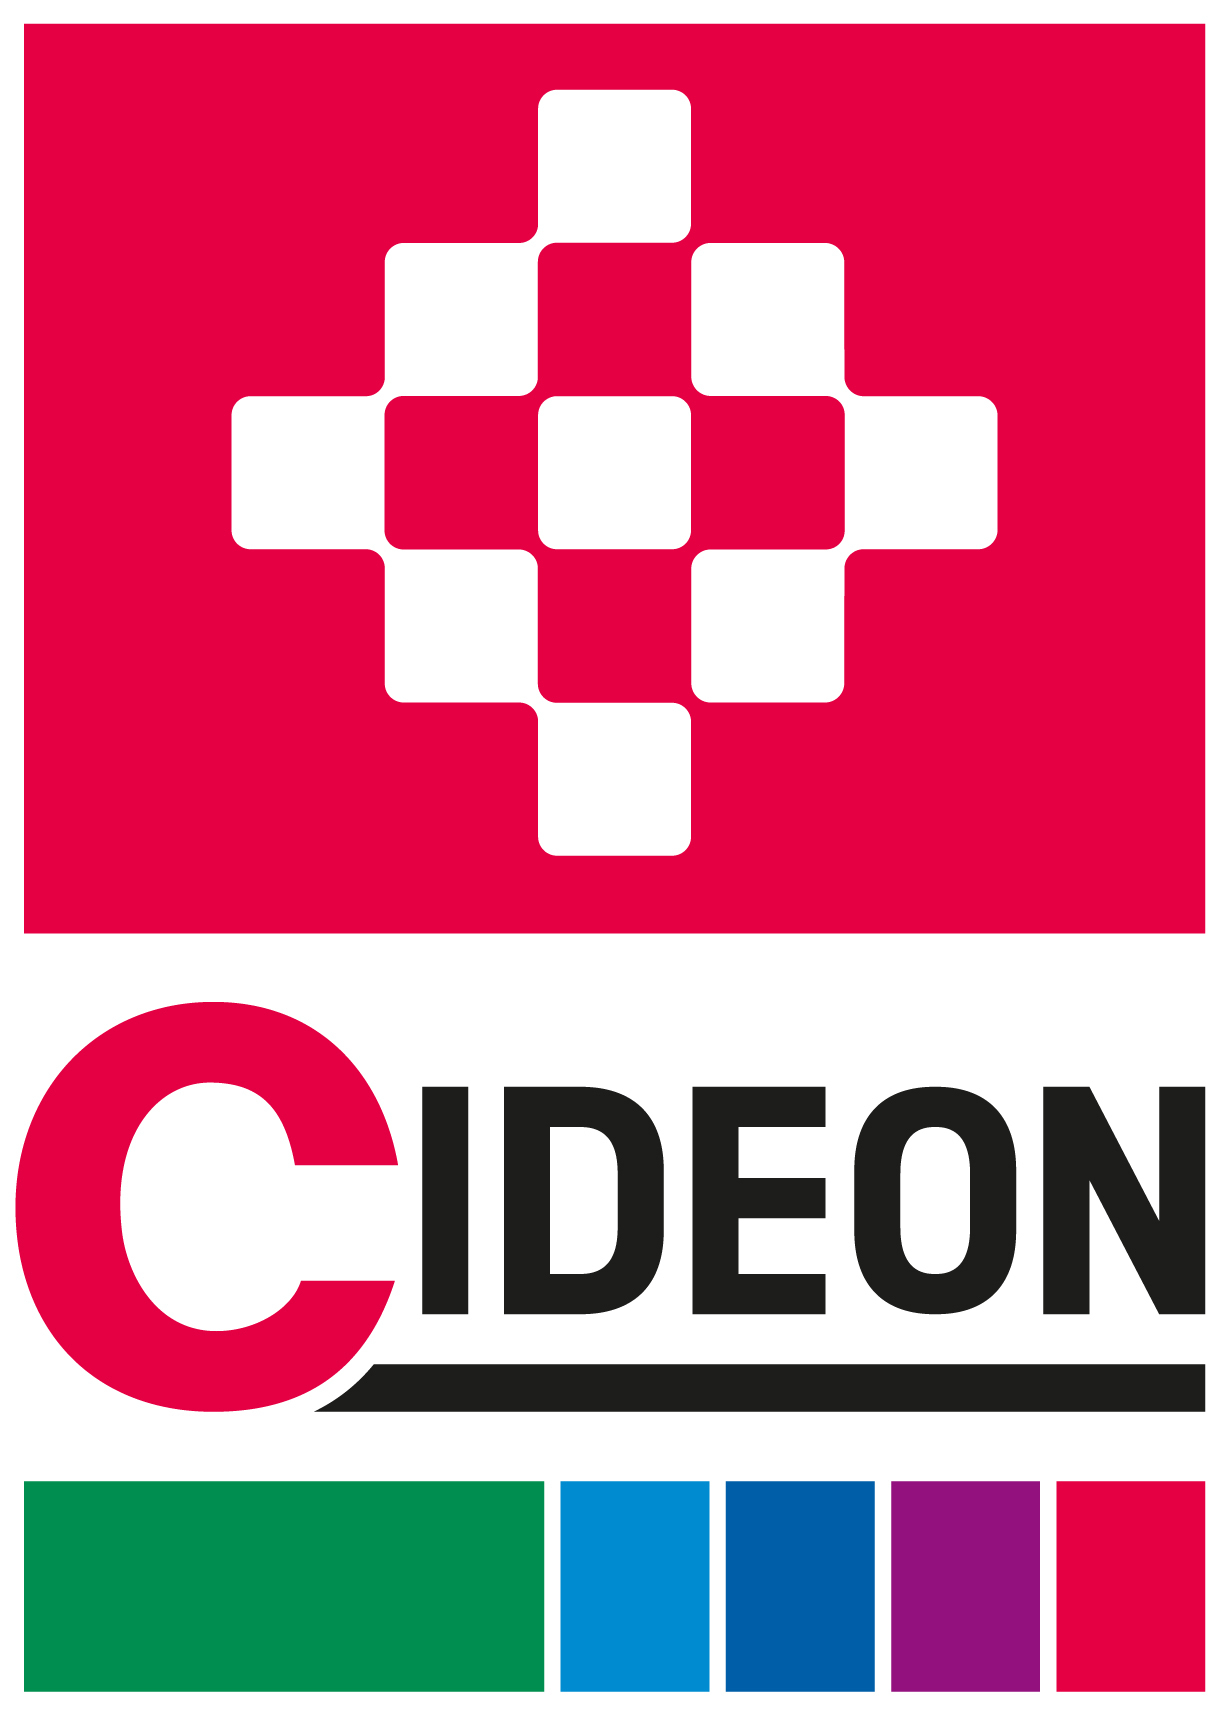 CIDEON Software & Services GmbH & Co.KG